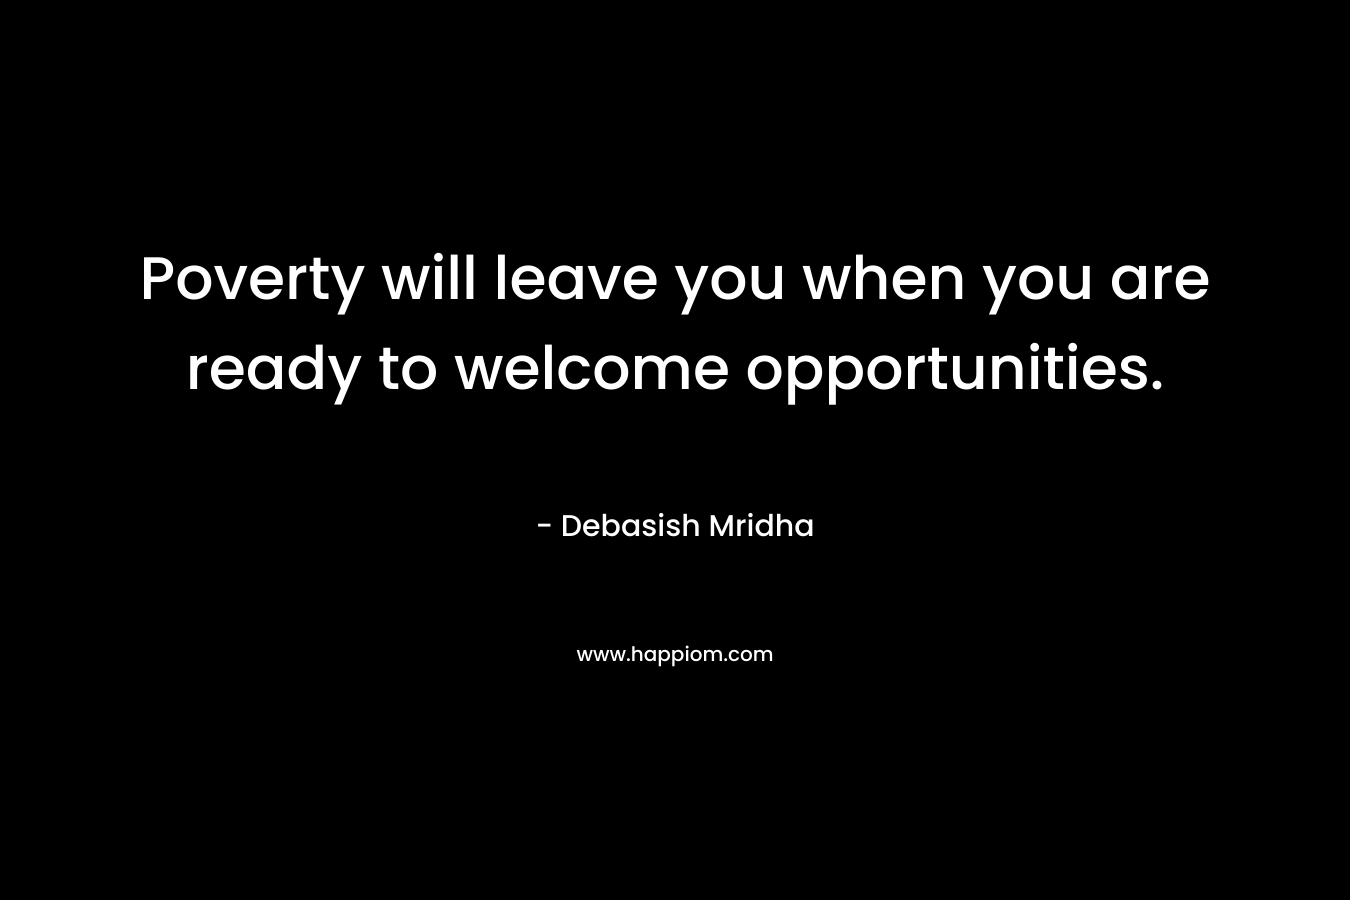 Poverty will leave you when you are ready to welcome opportunities.